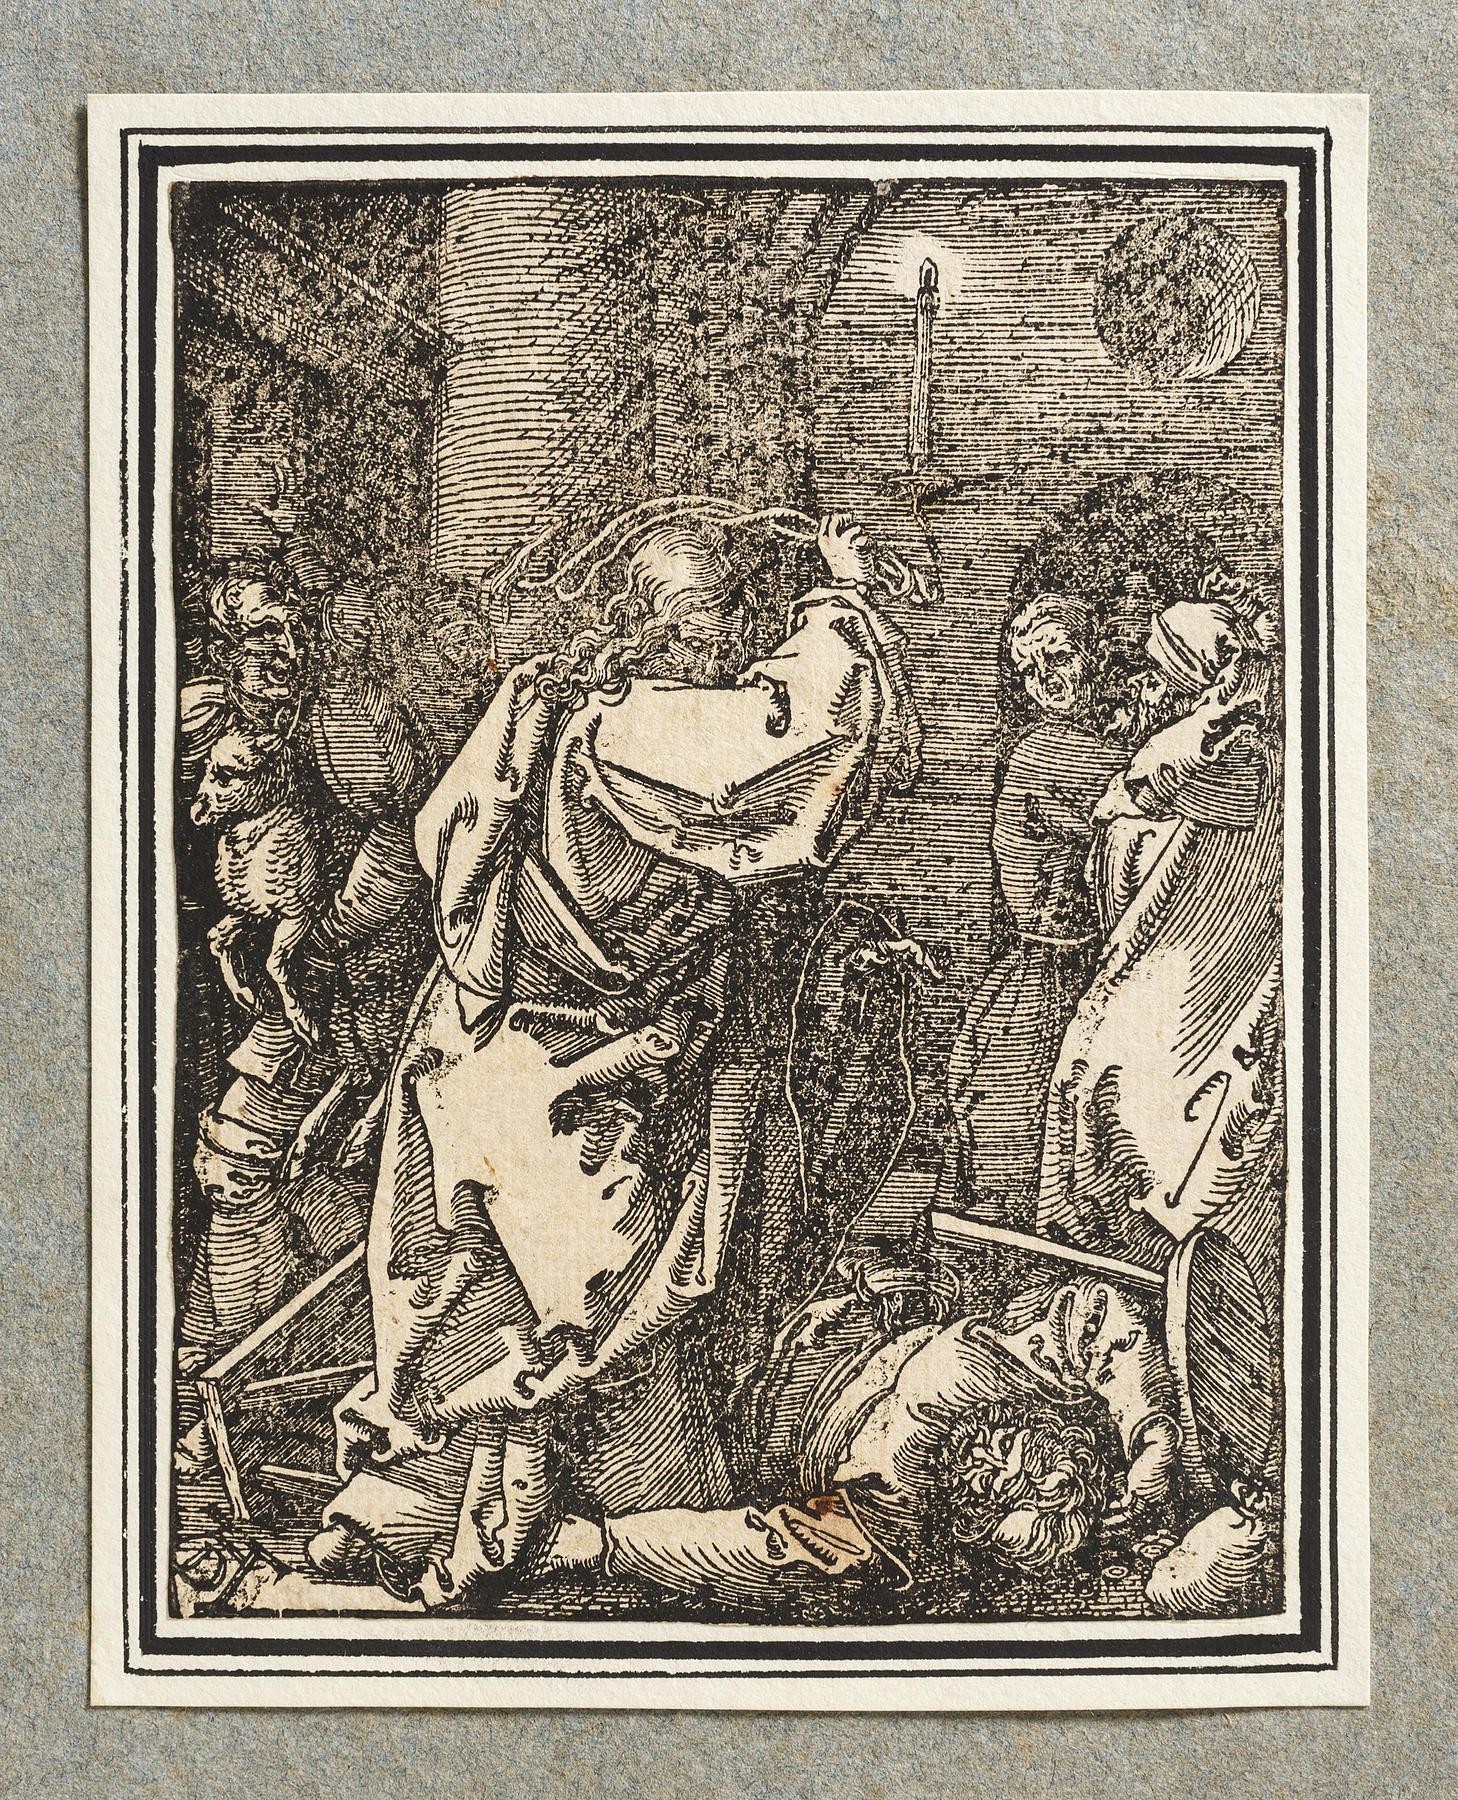 Christ Expelling the Moneylenders from the Temple, E132